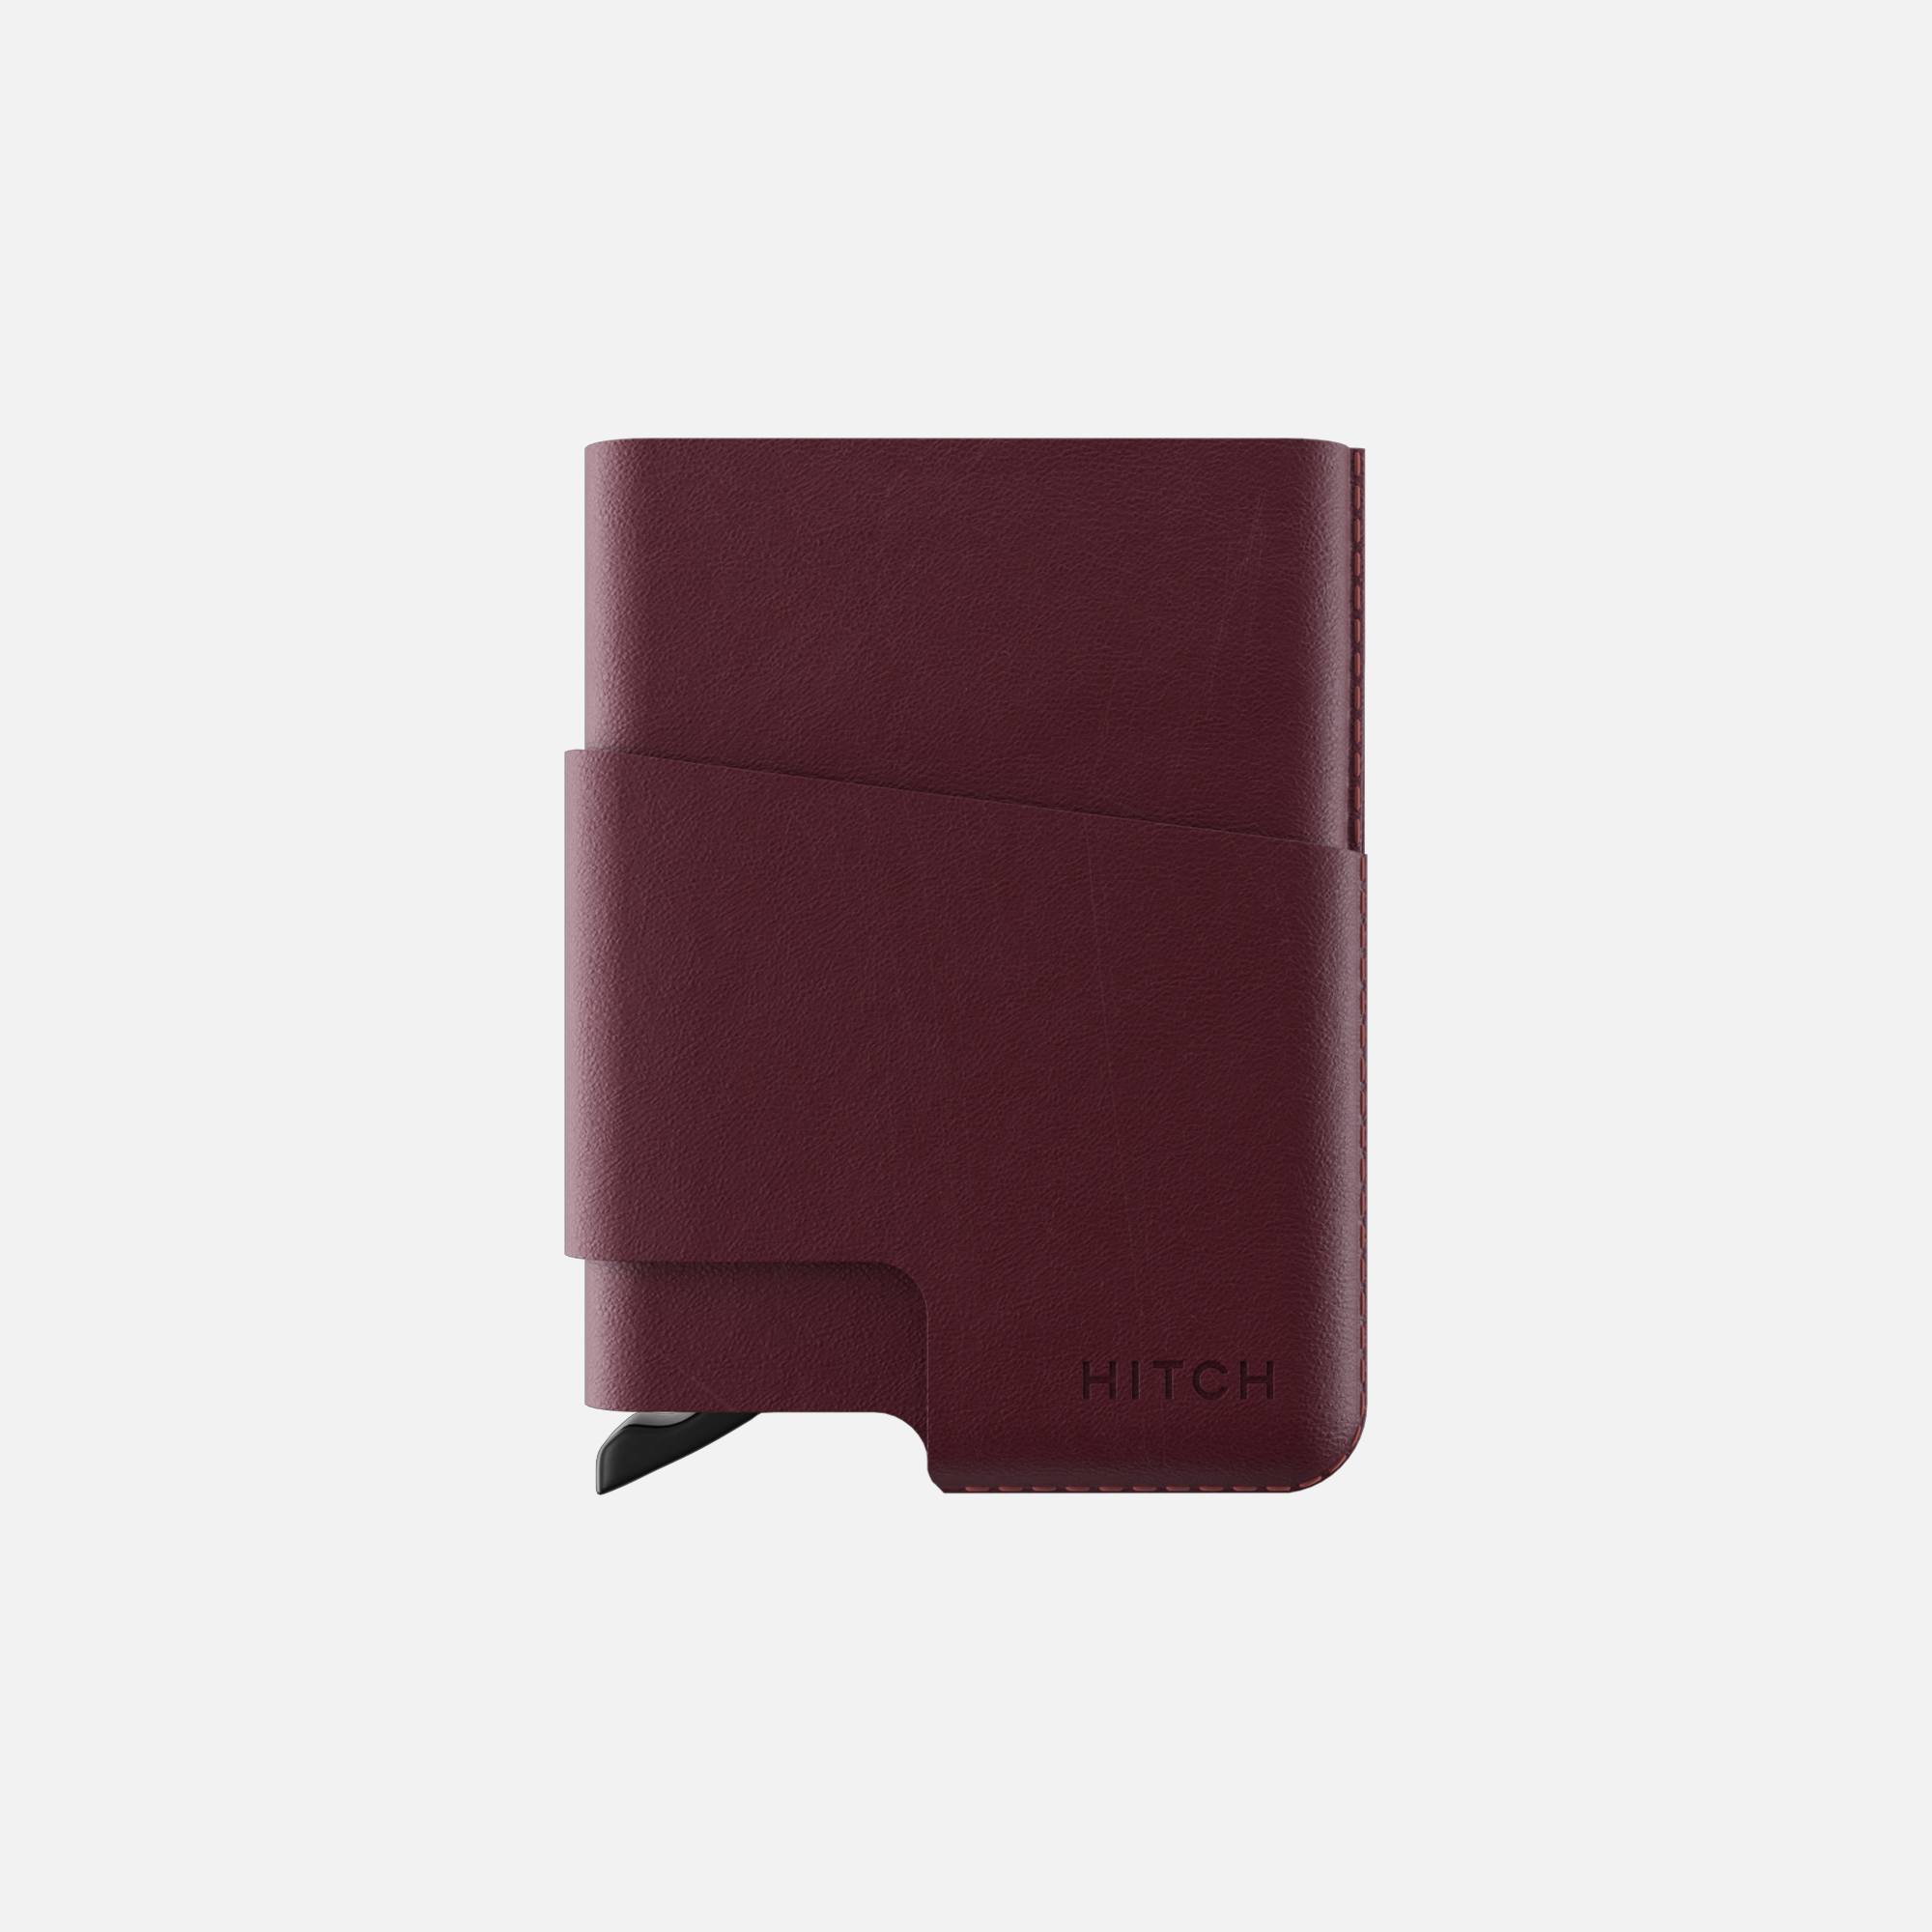 CUT-OUT Cardholder - RFID Block Featured - Handmade Natural Genuine Leather - Burgundy